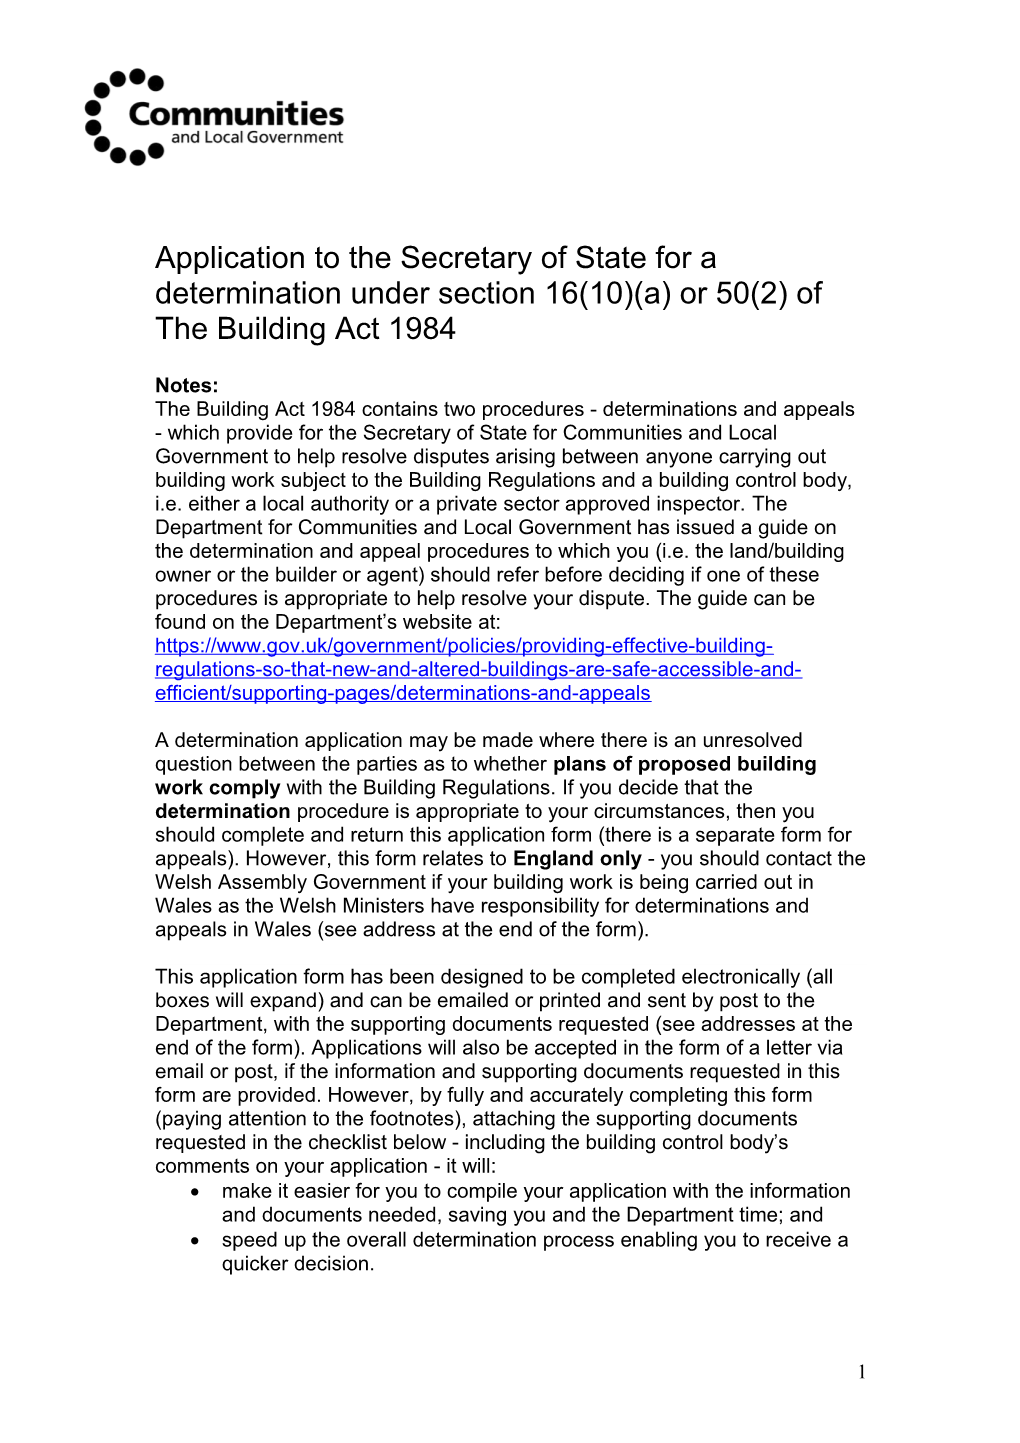 Application to the Secretary of State for a Determination